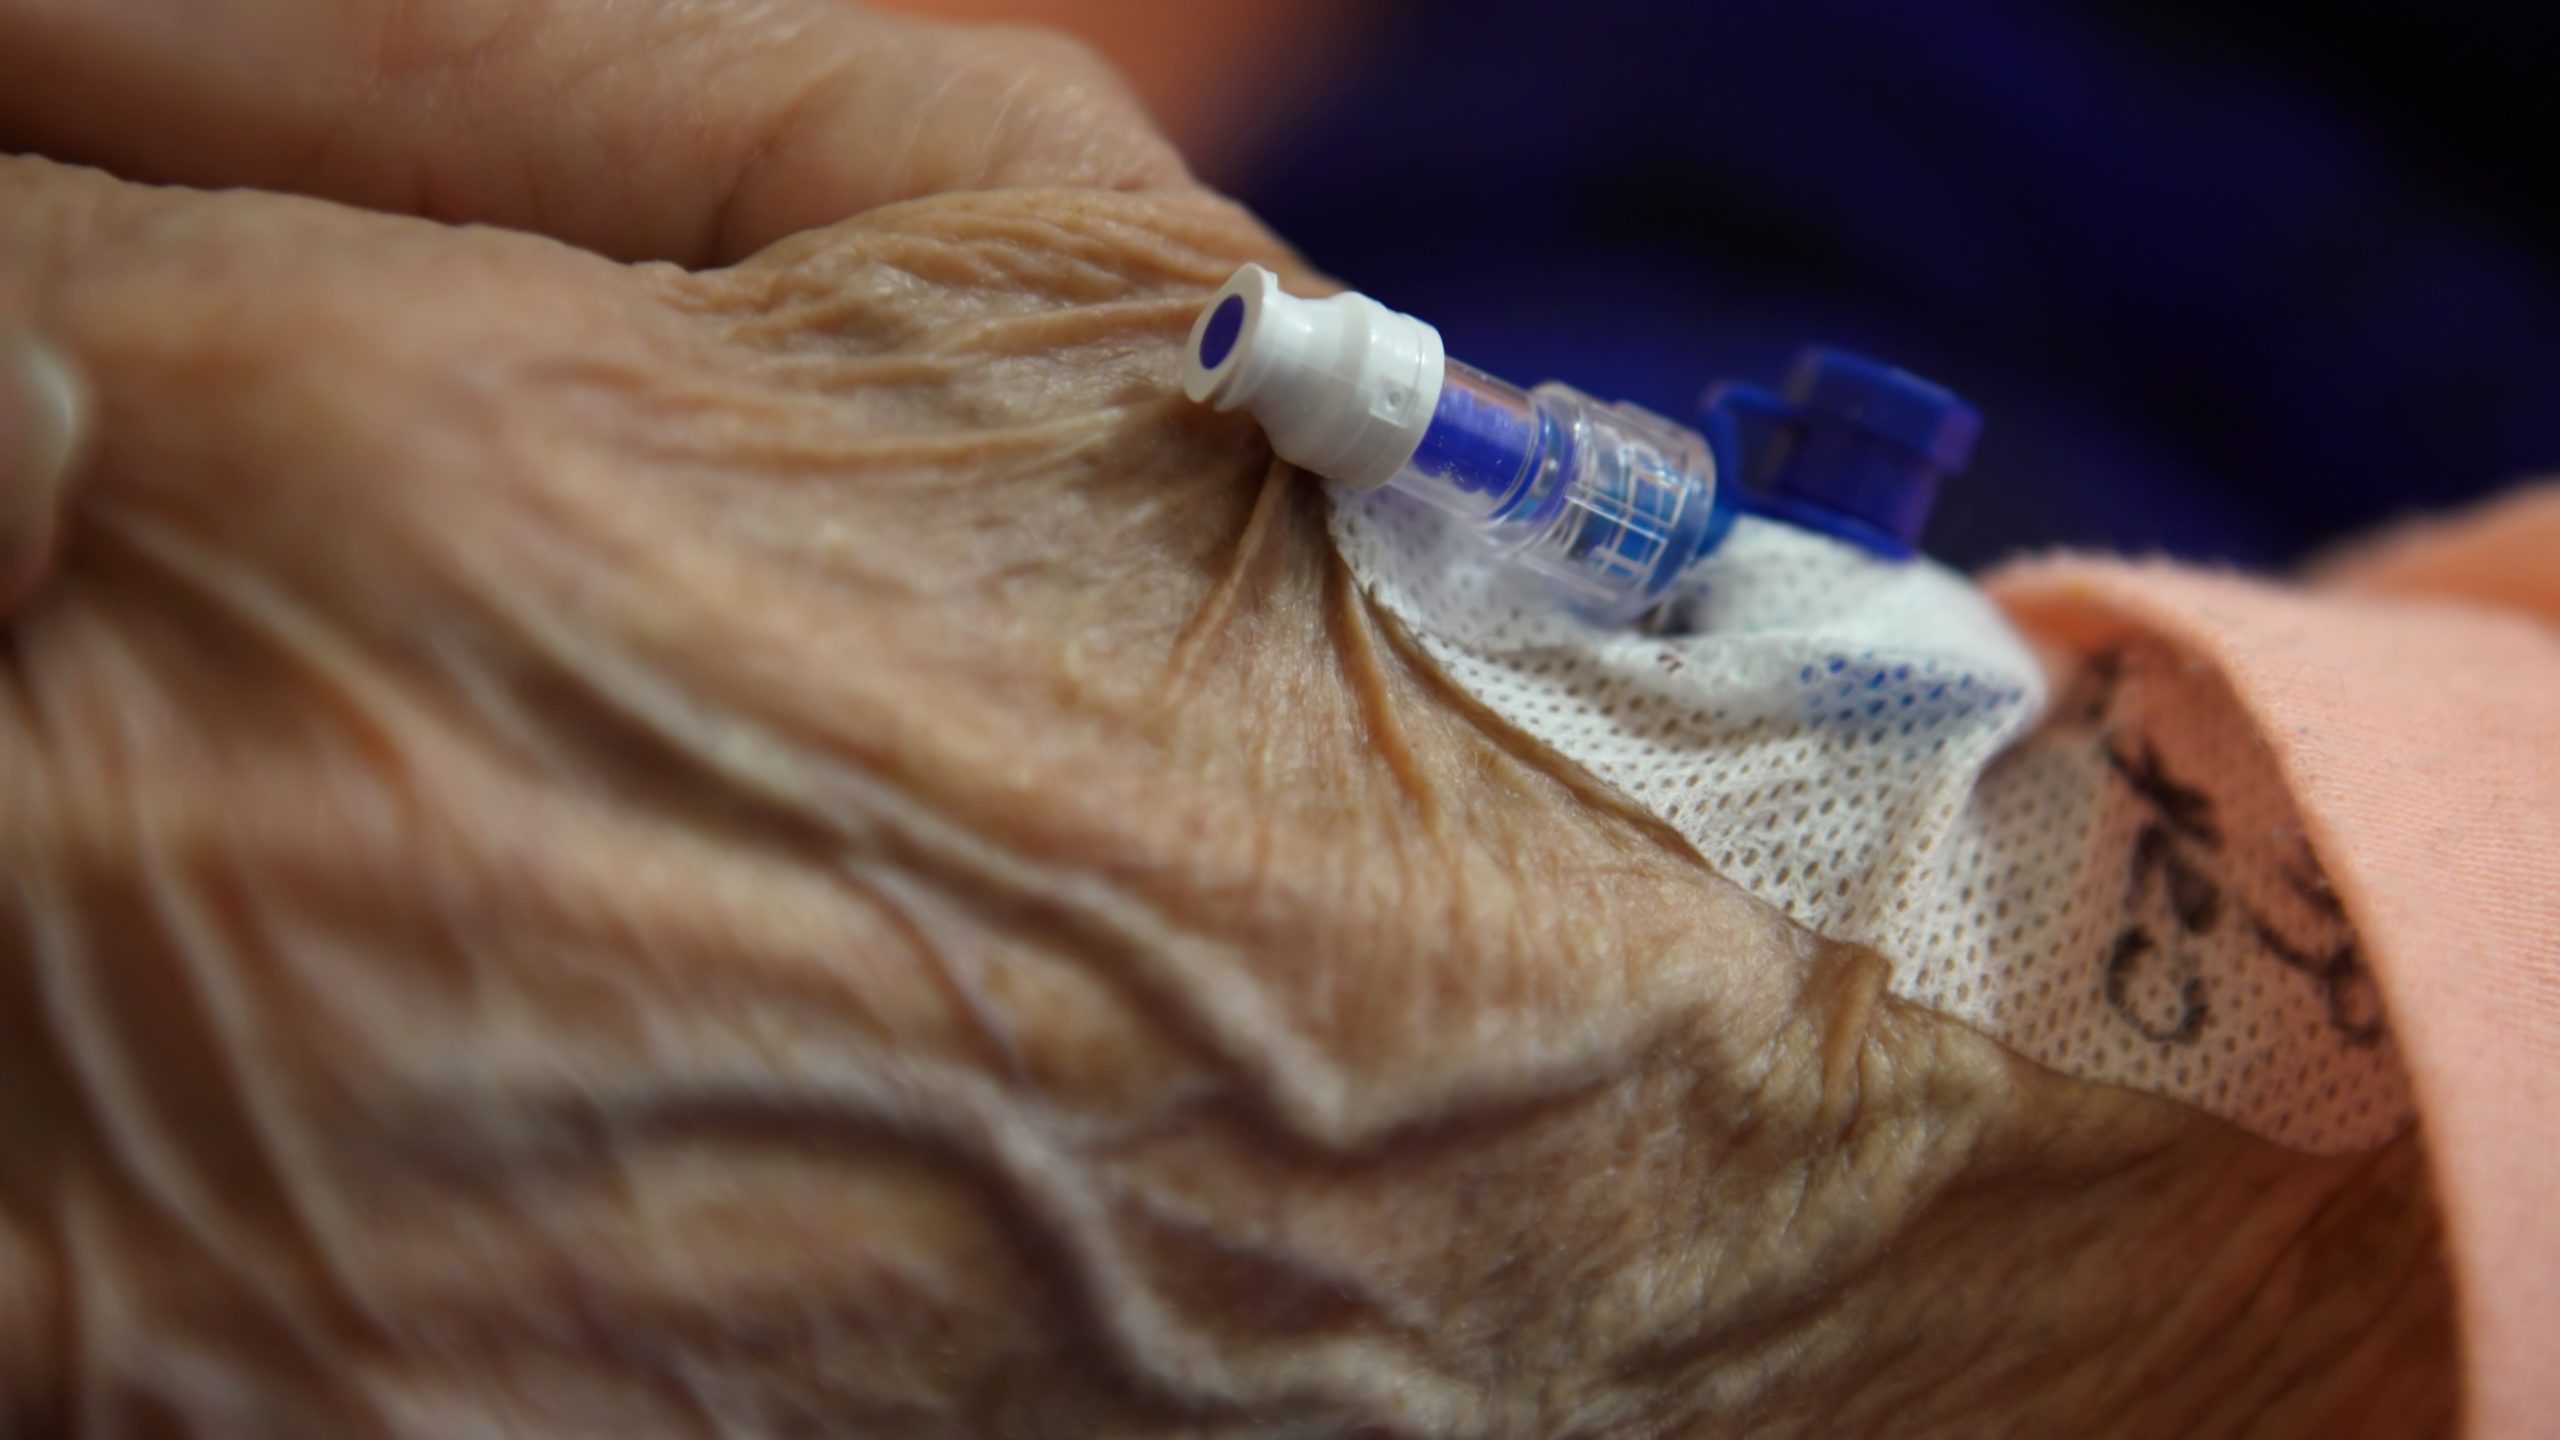 Intravenous cannula placed in the hand of an elderly patient for palliative care of a terminal patient.